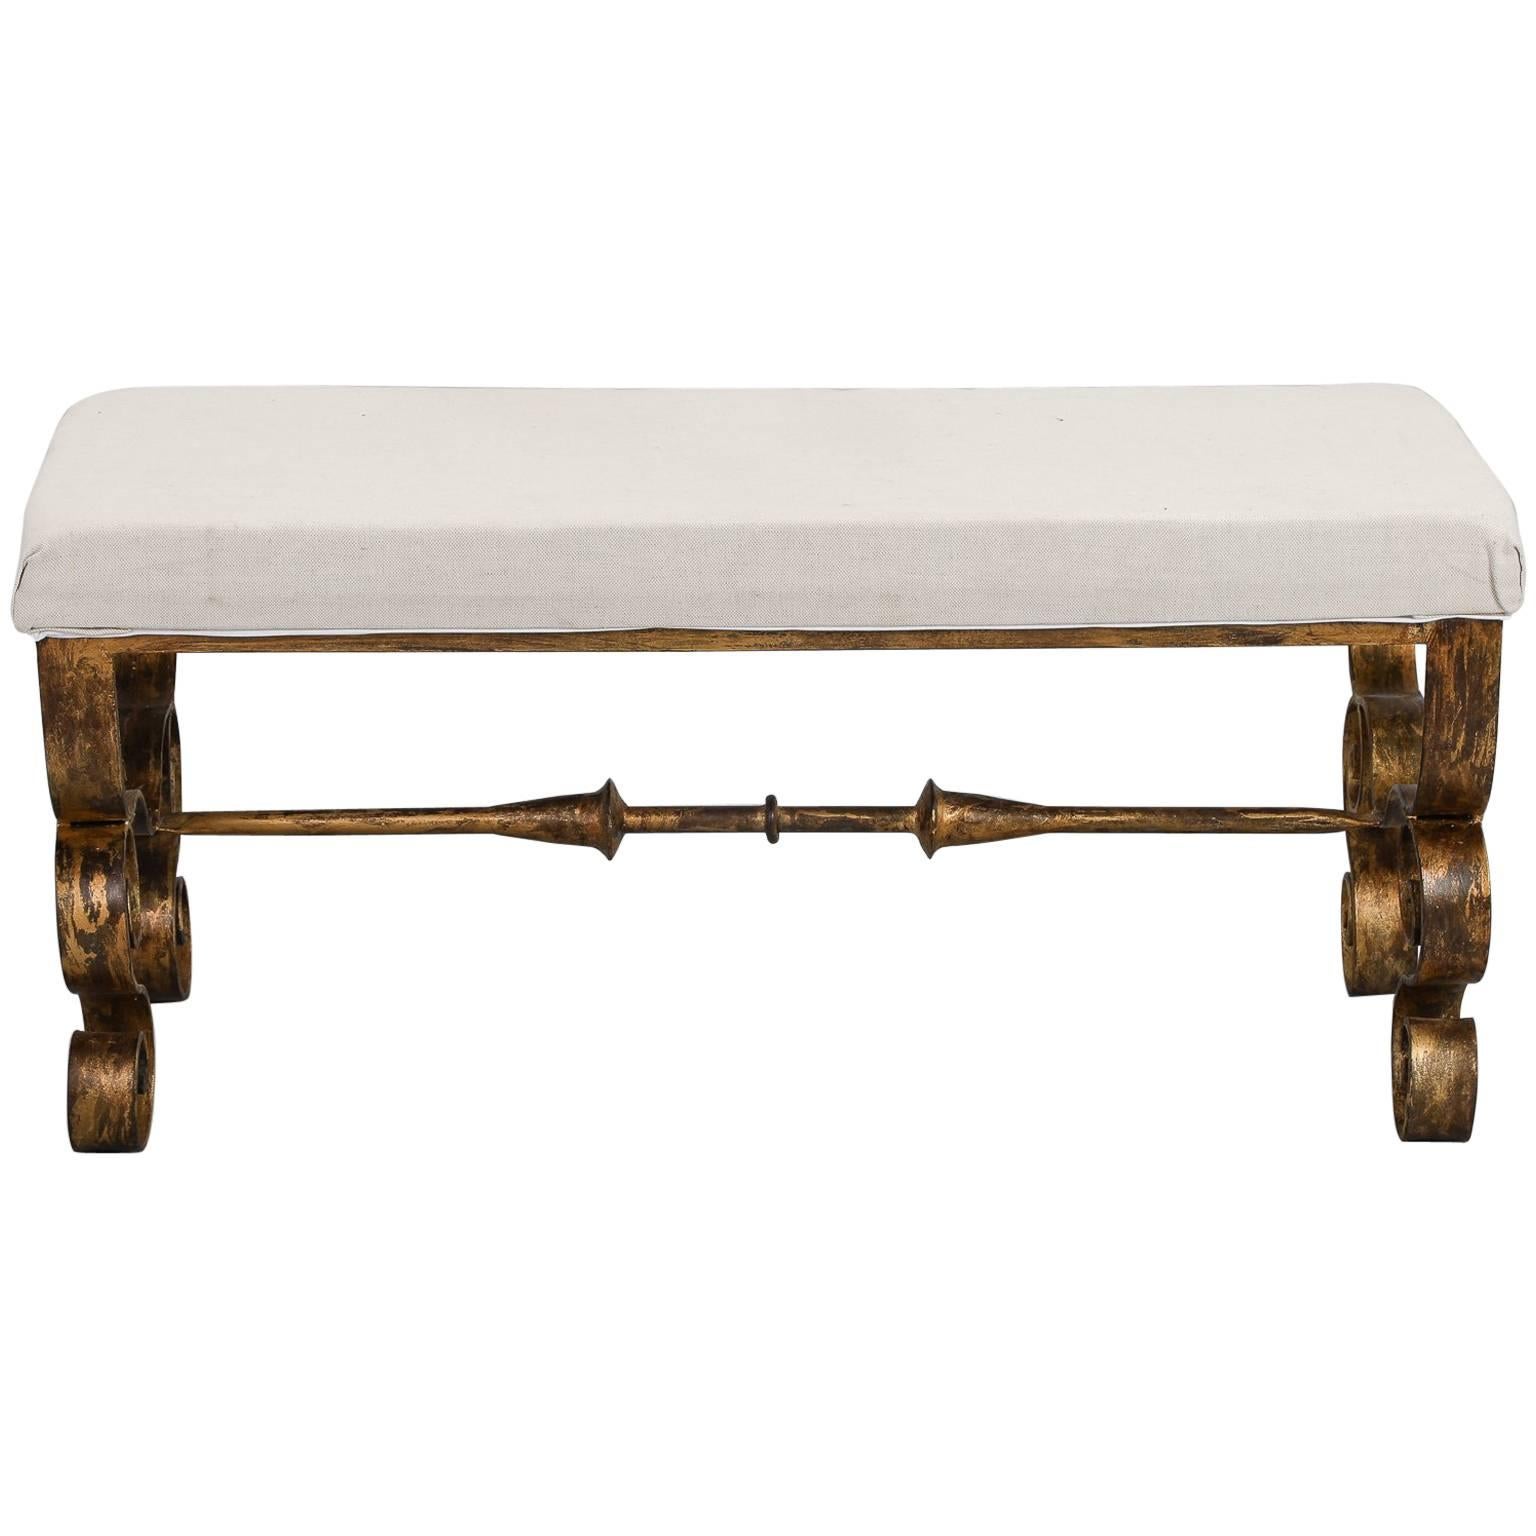 Upholstered Bench with Scrolled Gilt Metal Legs